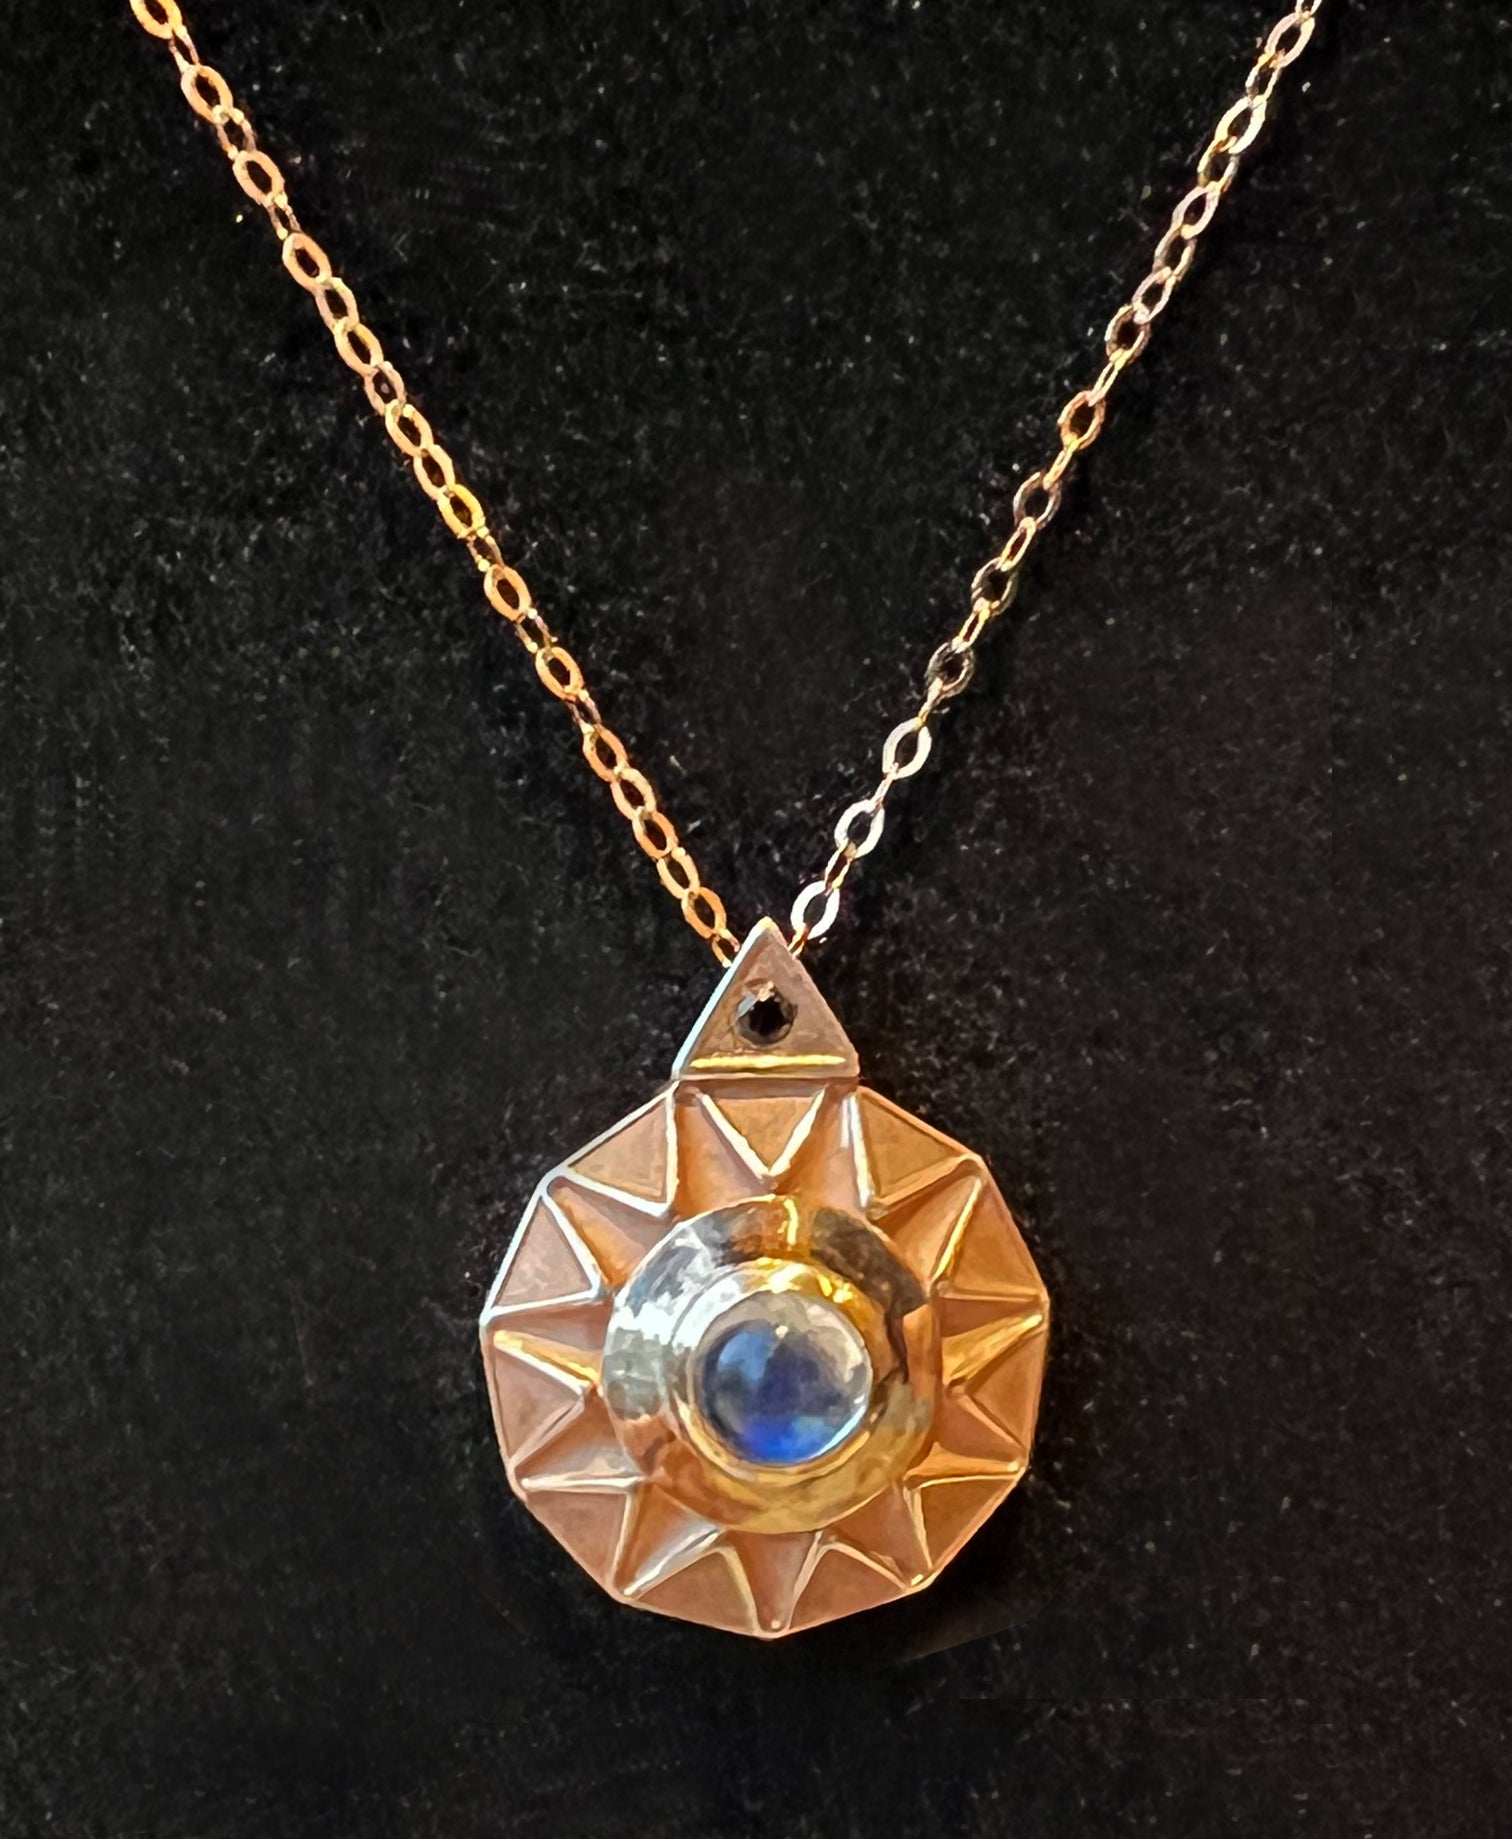 Rising Sun Pendant Necklace - Sterling Silver with Rose Gold Overlay